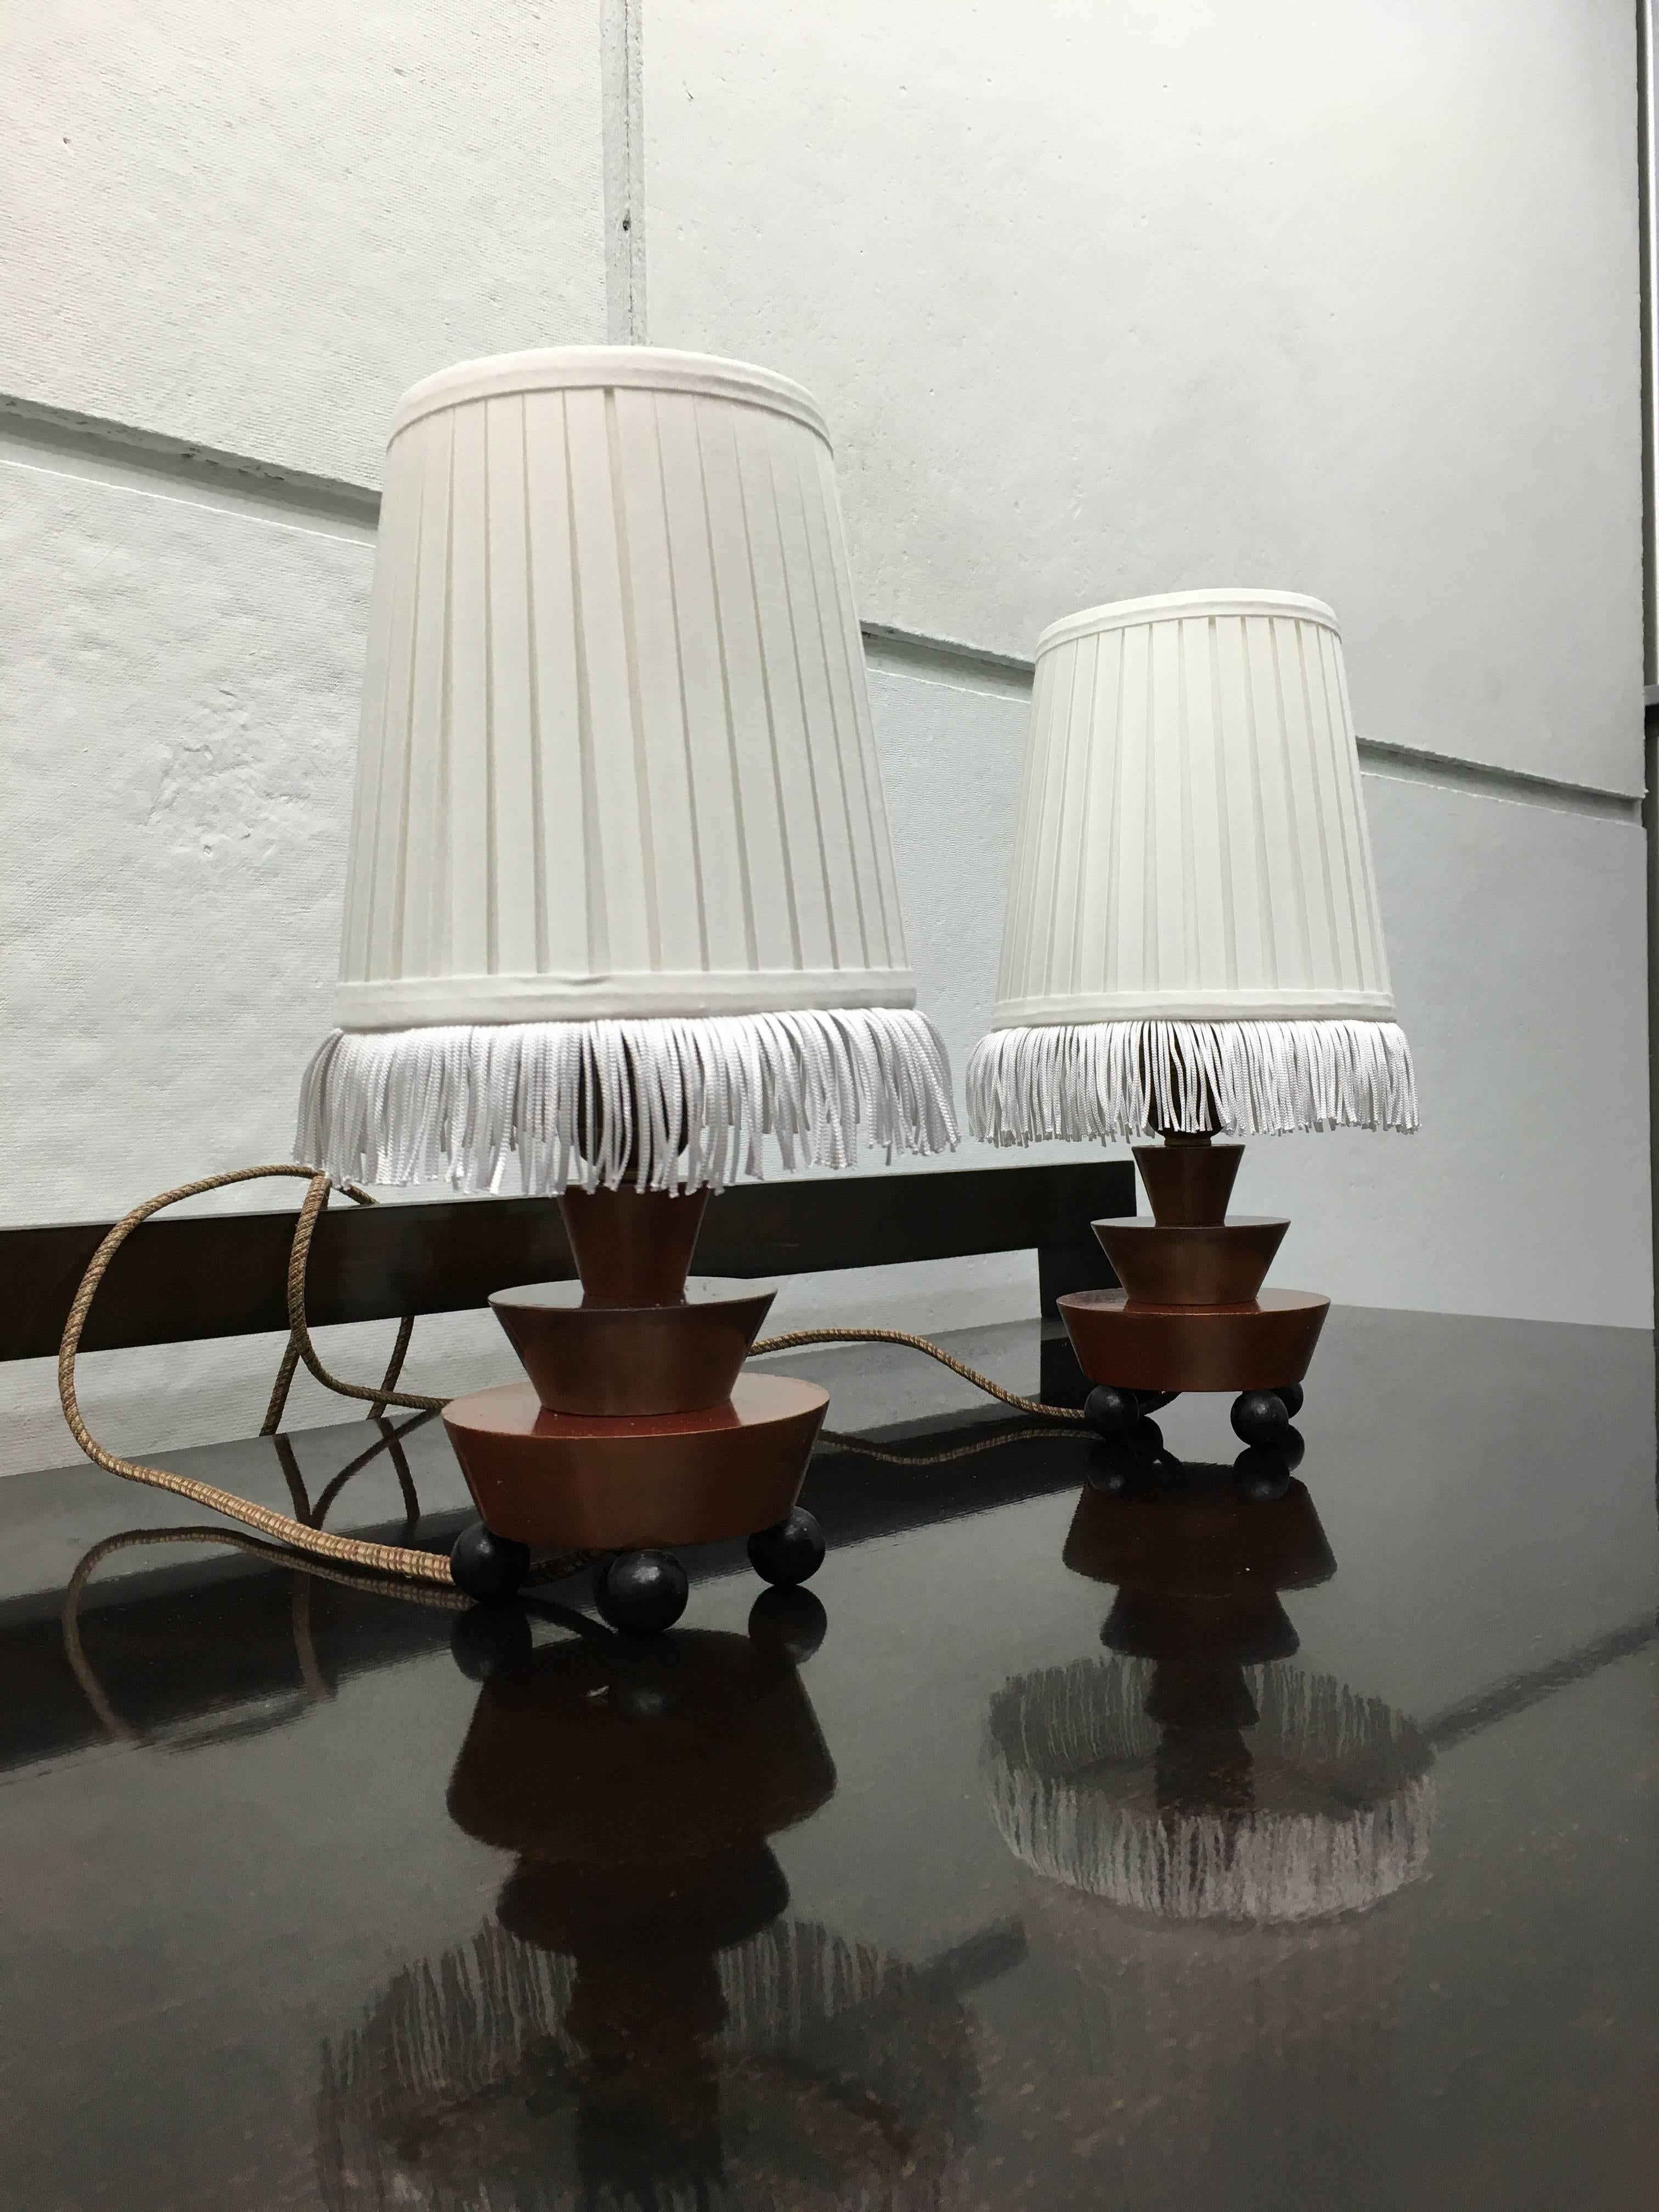 A pair of German Art Deco table lamps of expressionist design. The brass socket mounted on a lacquered wooden base.